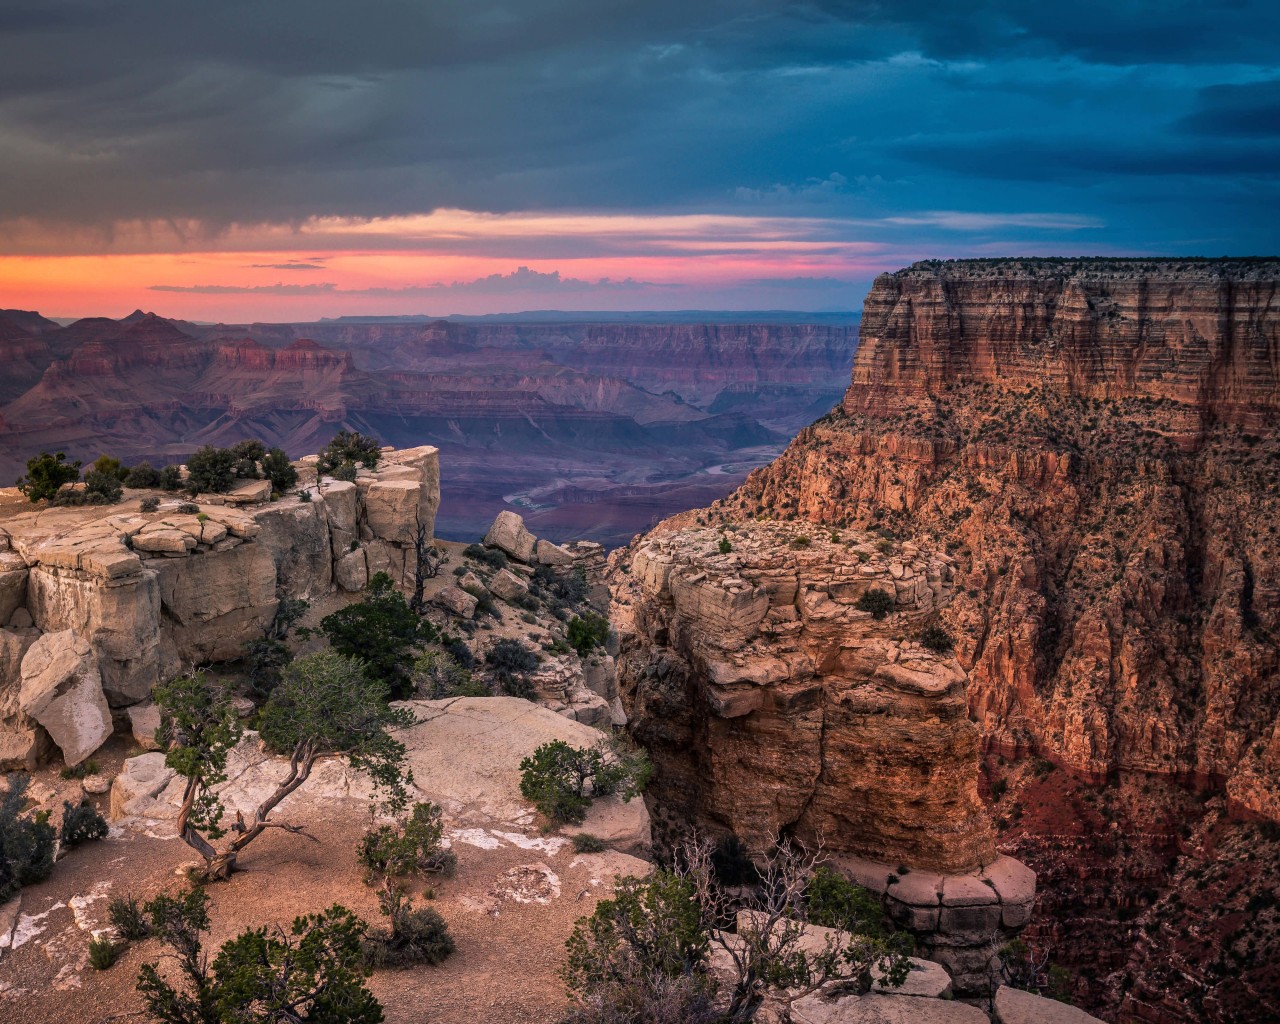 Sunset At The Grand Canyon Wallpaper for Desktop 1280x1024